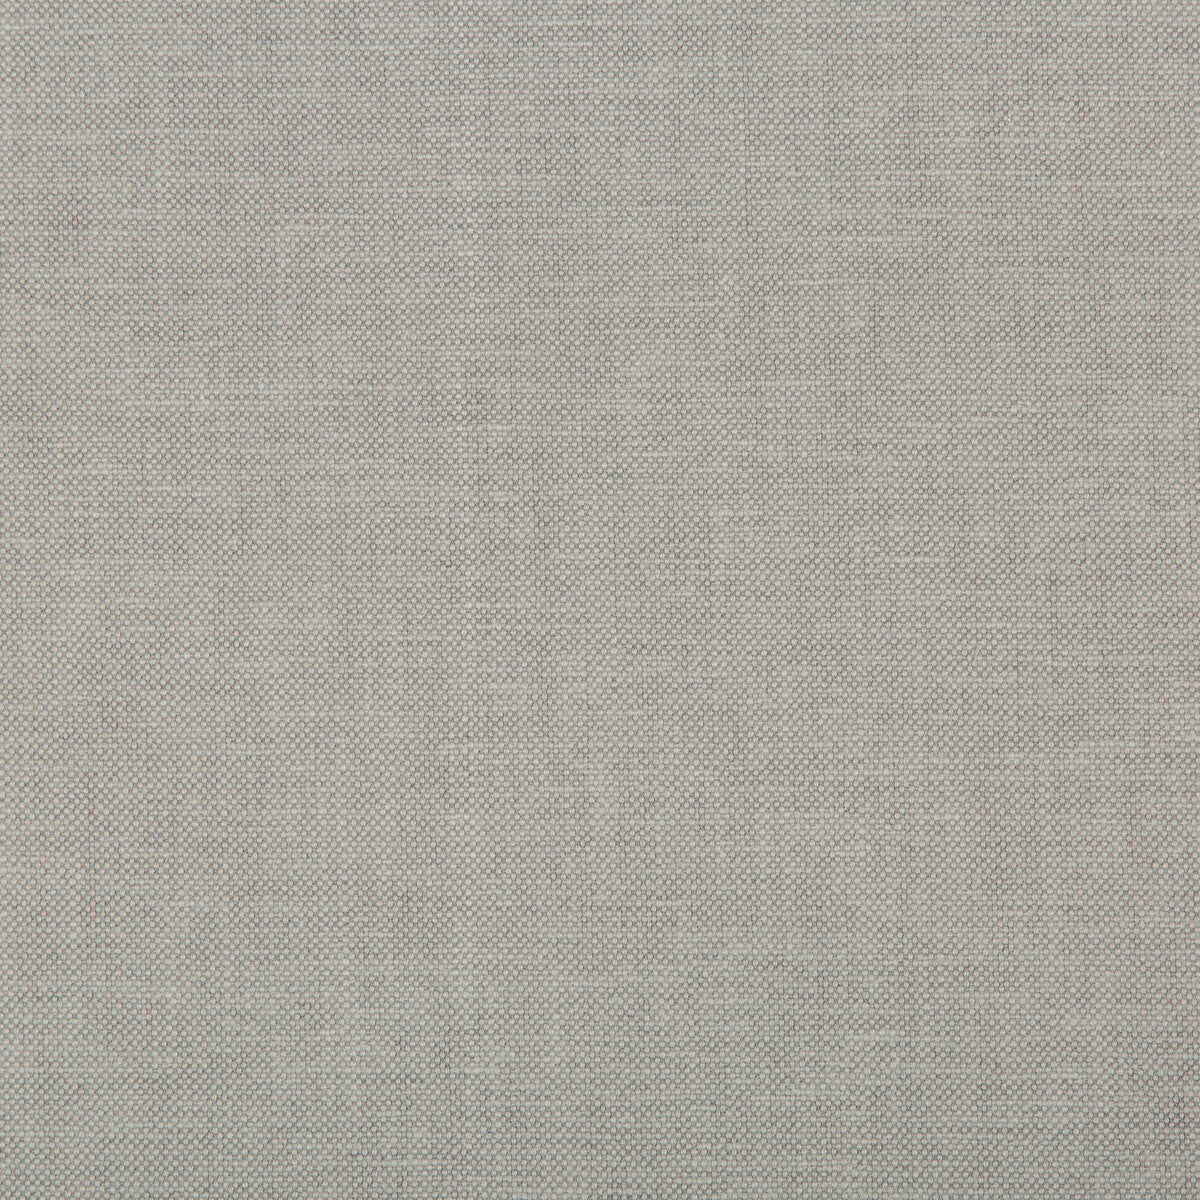 Oxfordian fabric in grey color - pattern 35543.11.0 - by Kravet Basics in the Bermuda collection